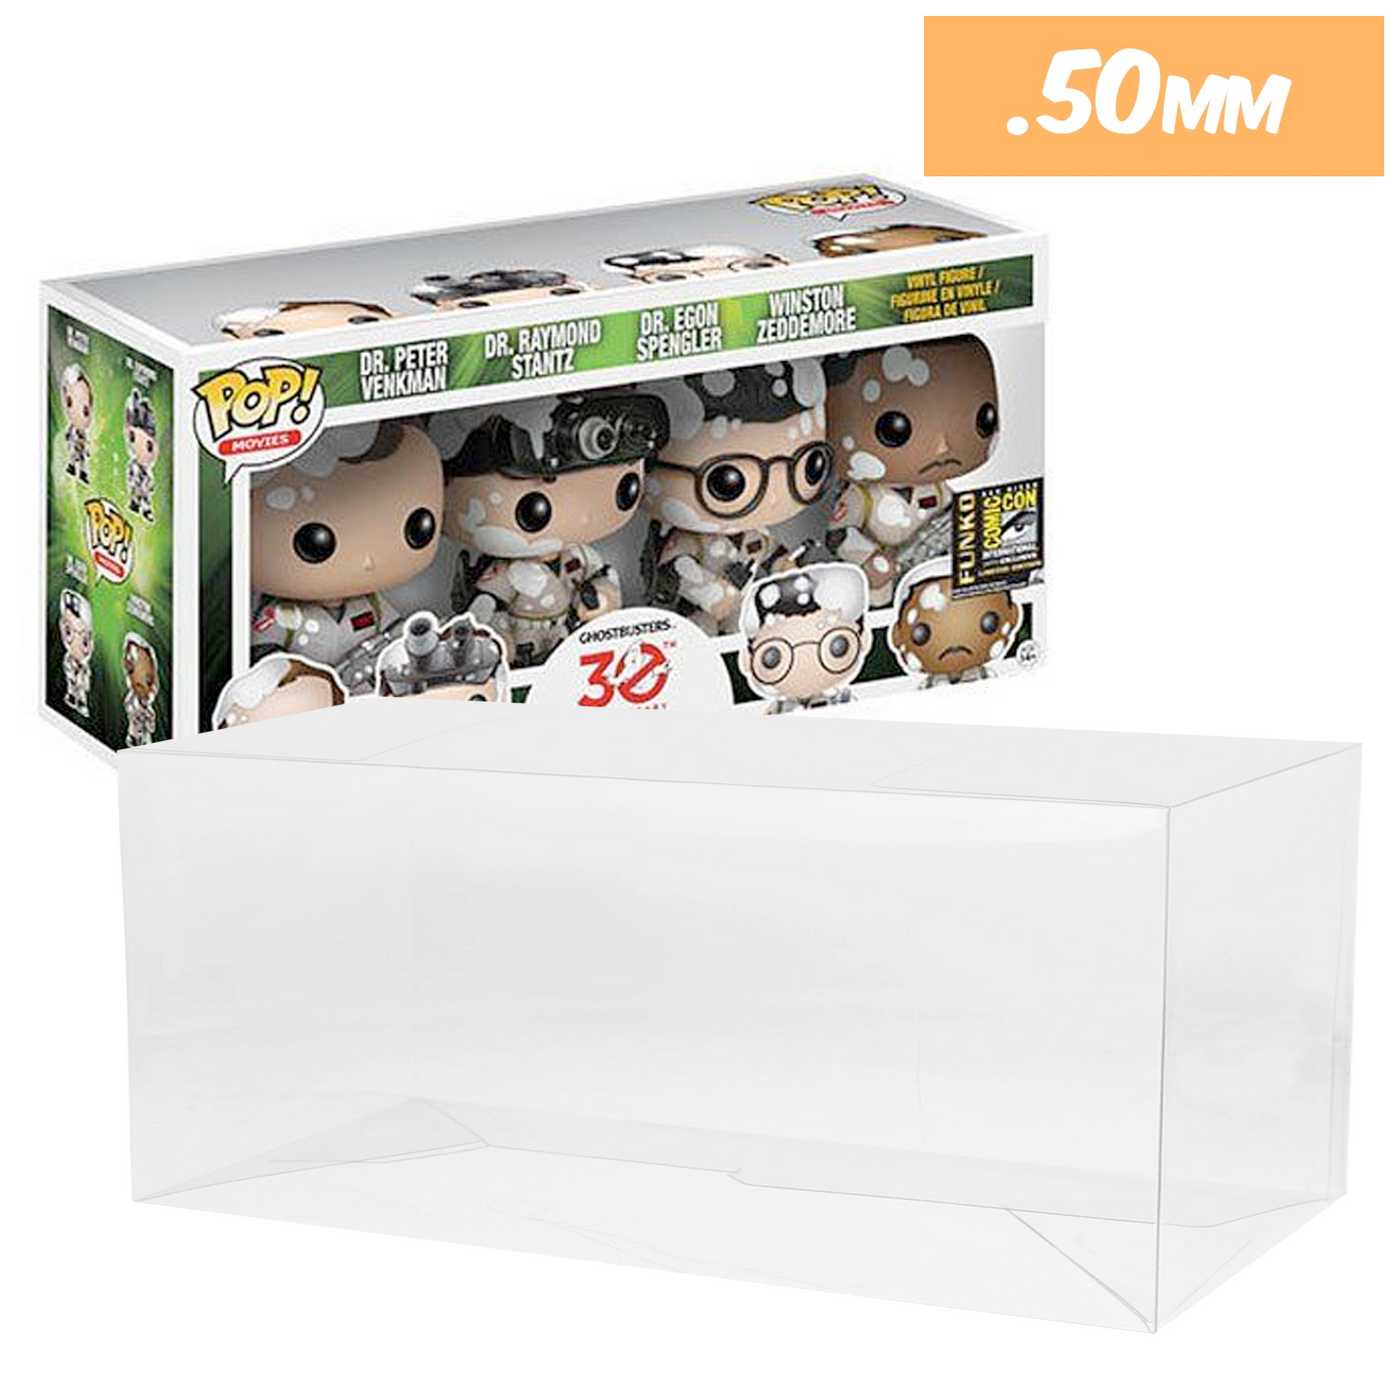 sdcc ghostbusters 4 pack best funko pop protectors thick strong uv scratch flat top stack vinyl display geek plastic shield vaulted eco armor fits collect protect display case kollector protector